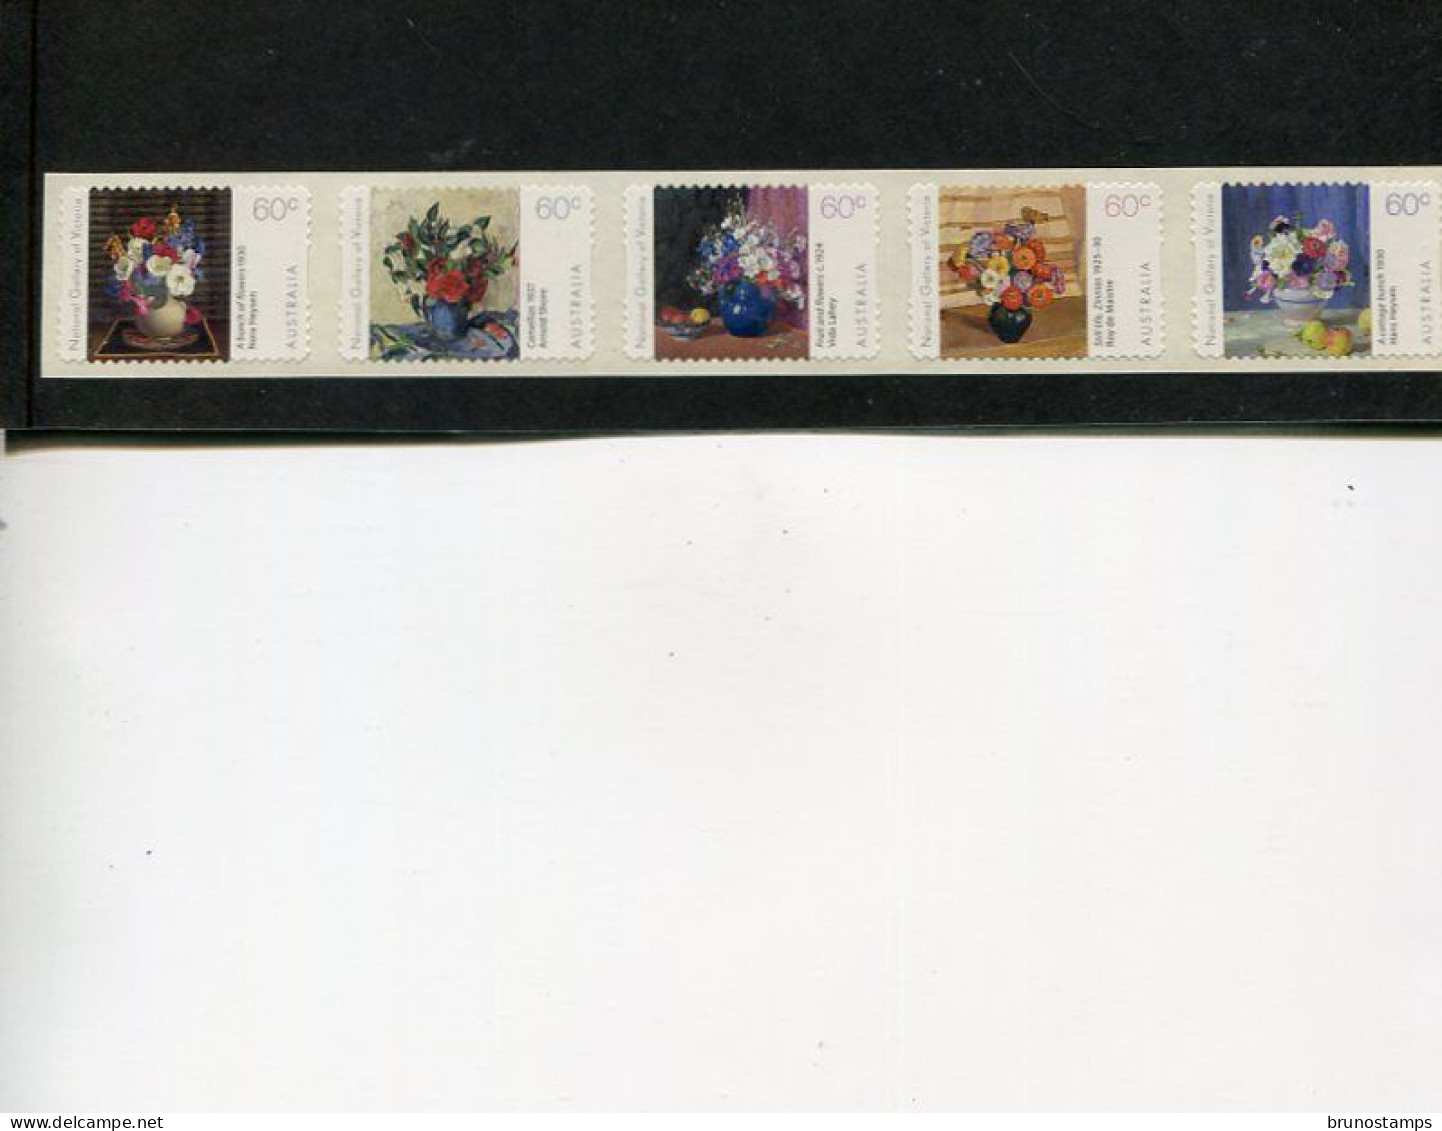 AUSTRALIA - 2011  NATIONAL GALLERY  SELF ADHESIVE   SET  MINT NH - Mint Stamps